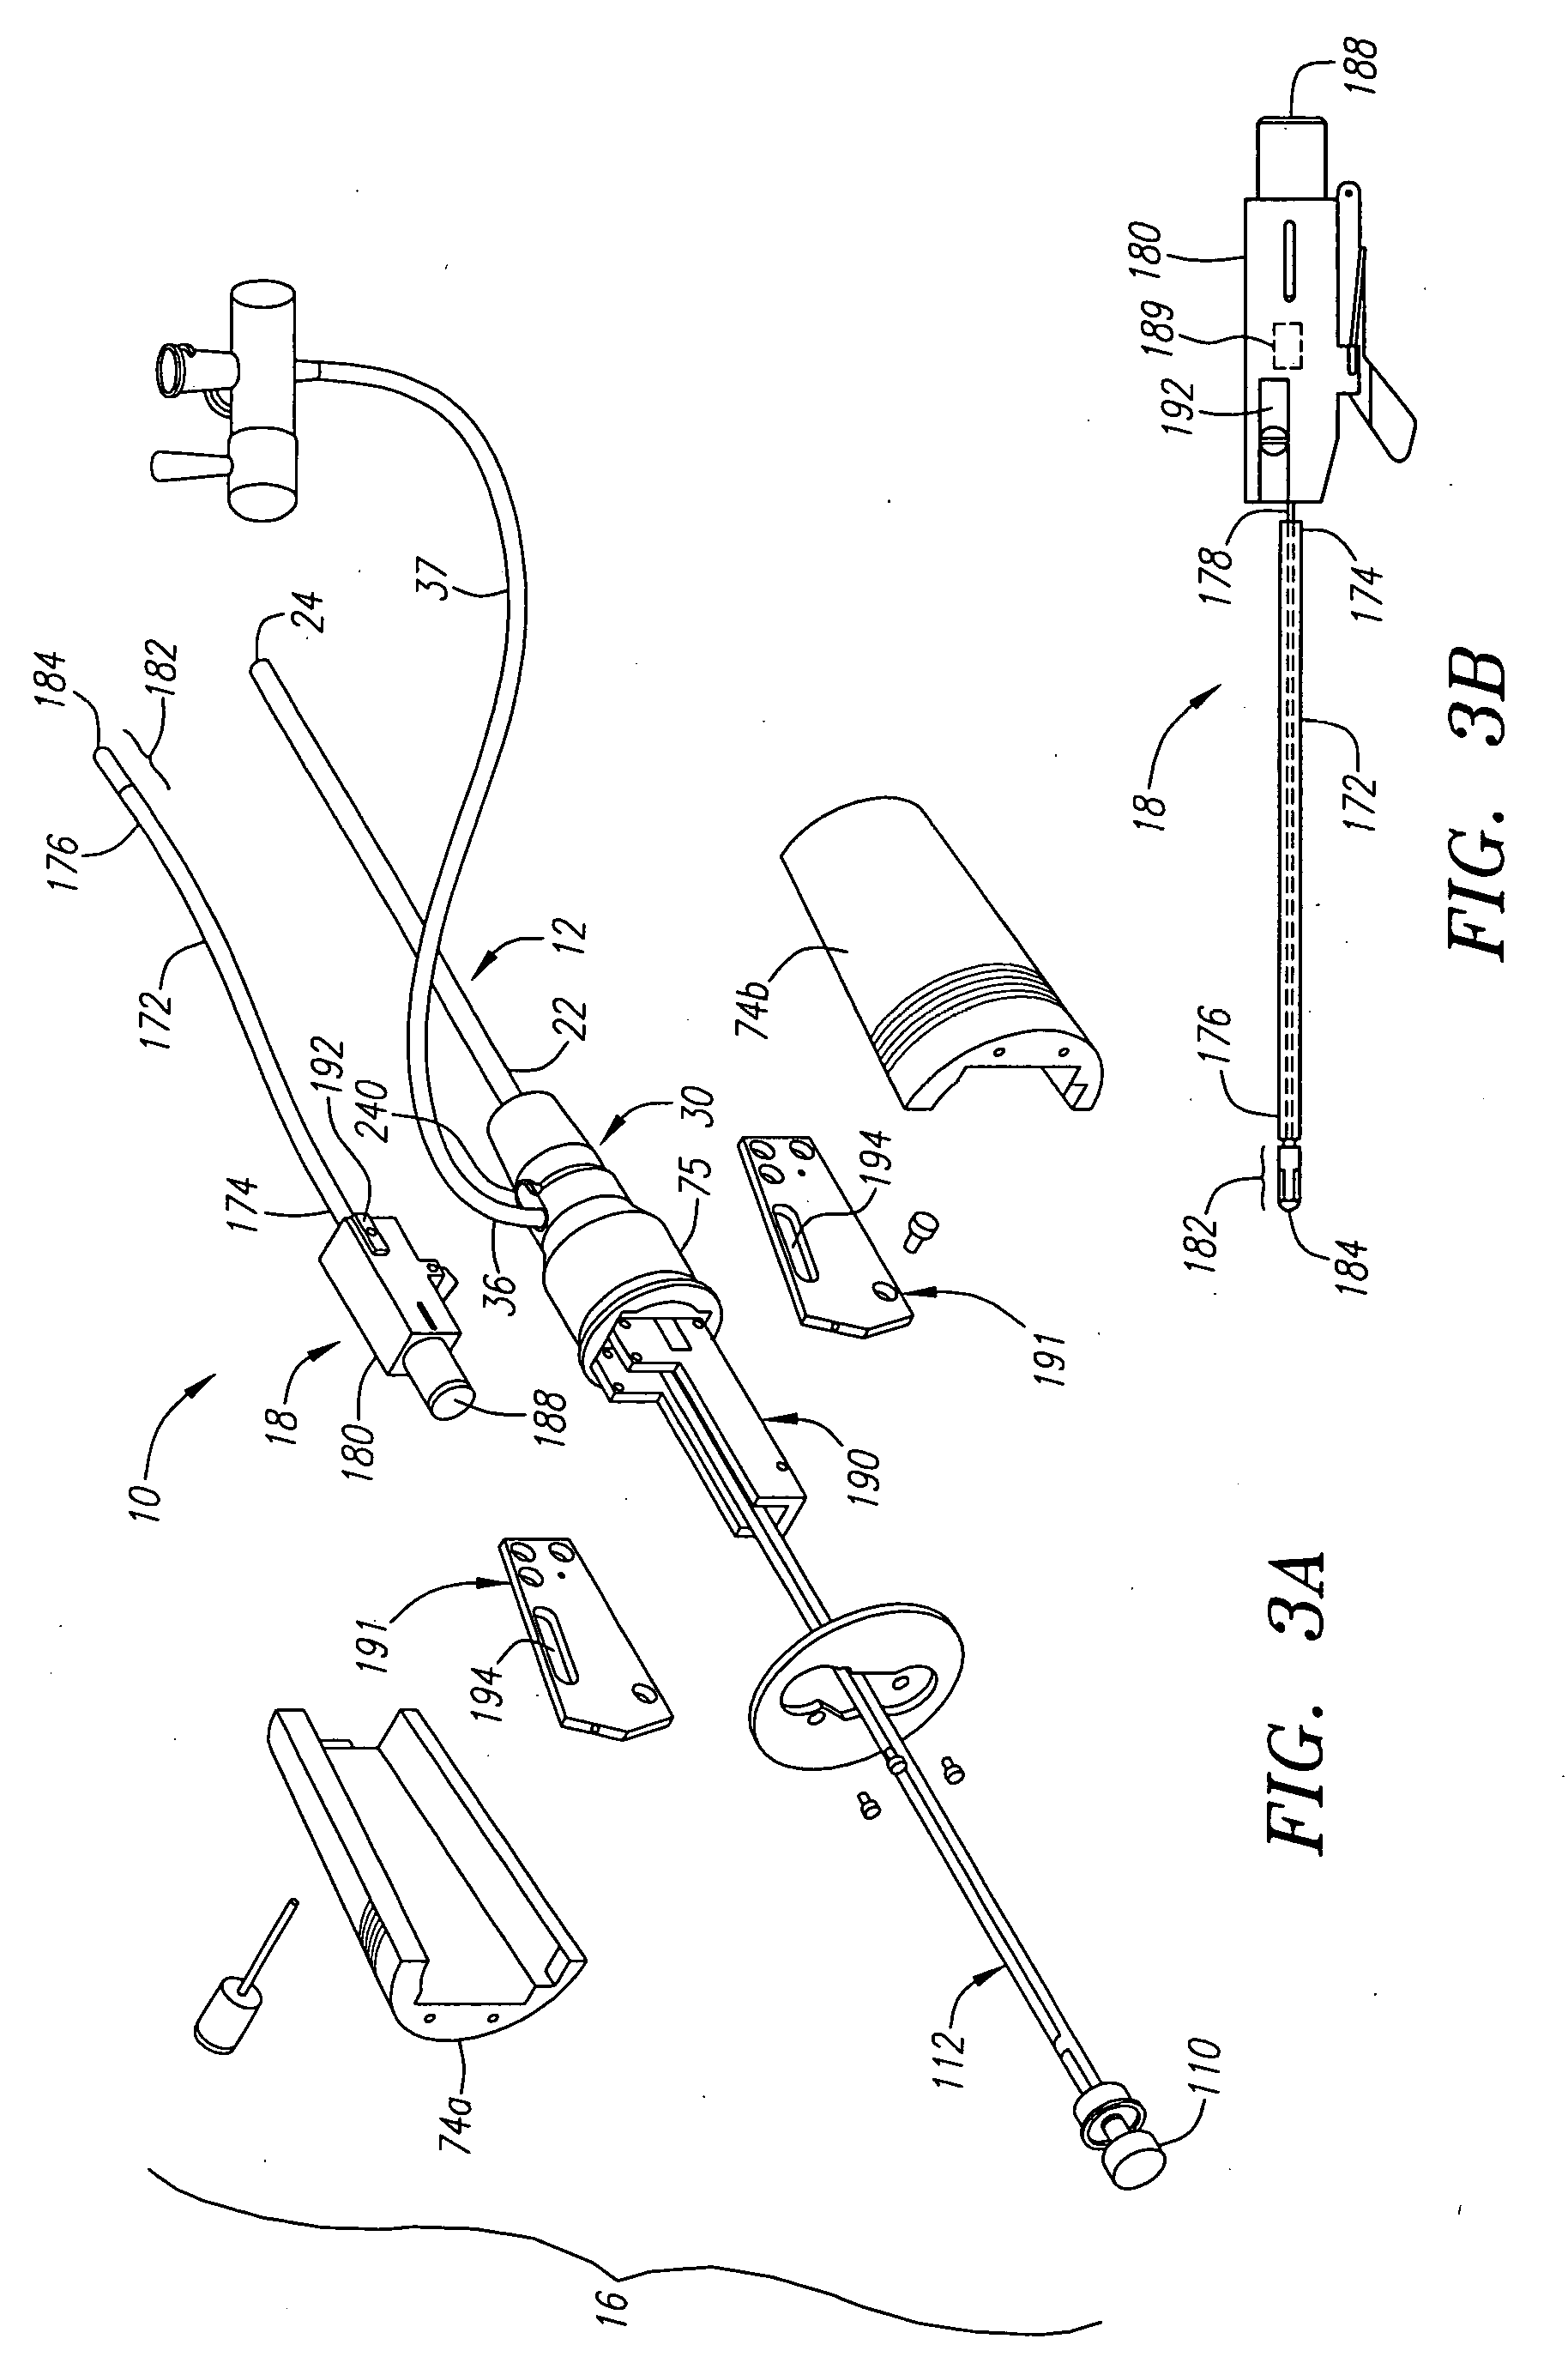 Apparatus and methods for delivering a closure device